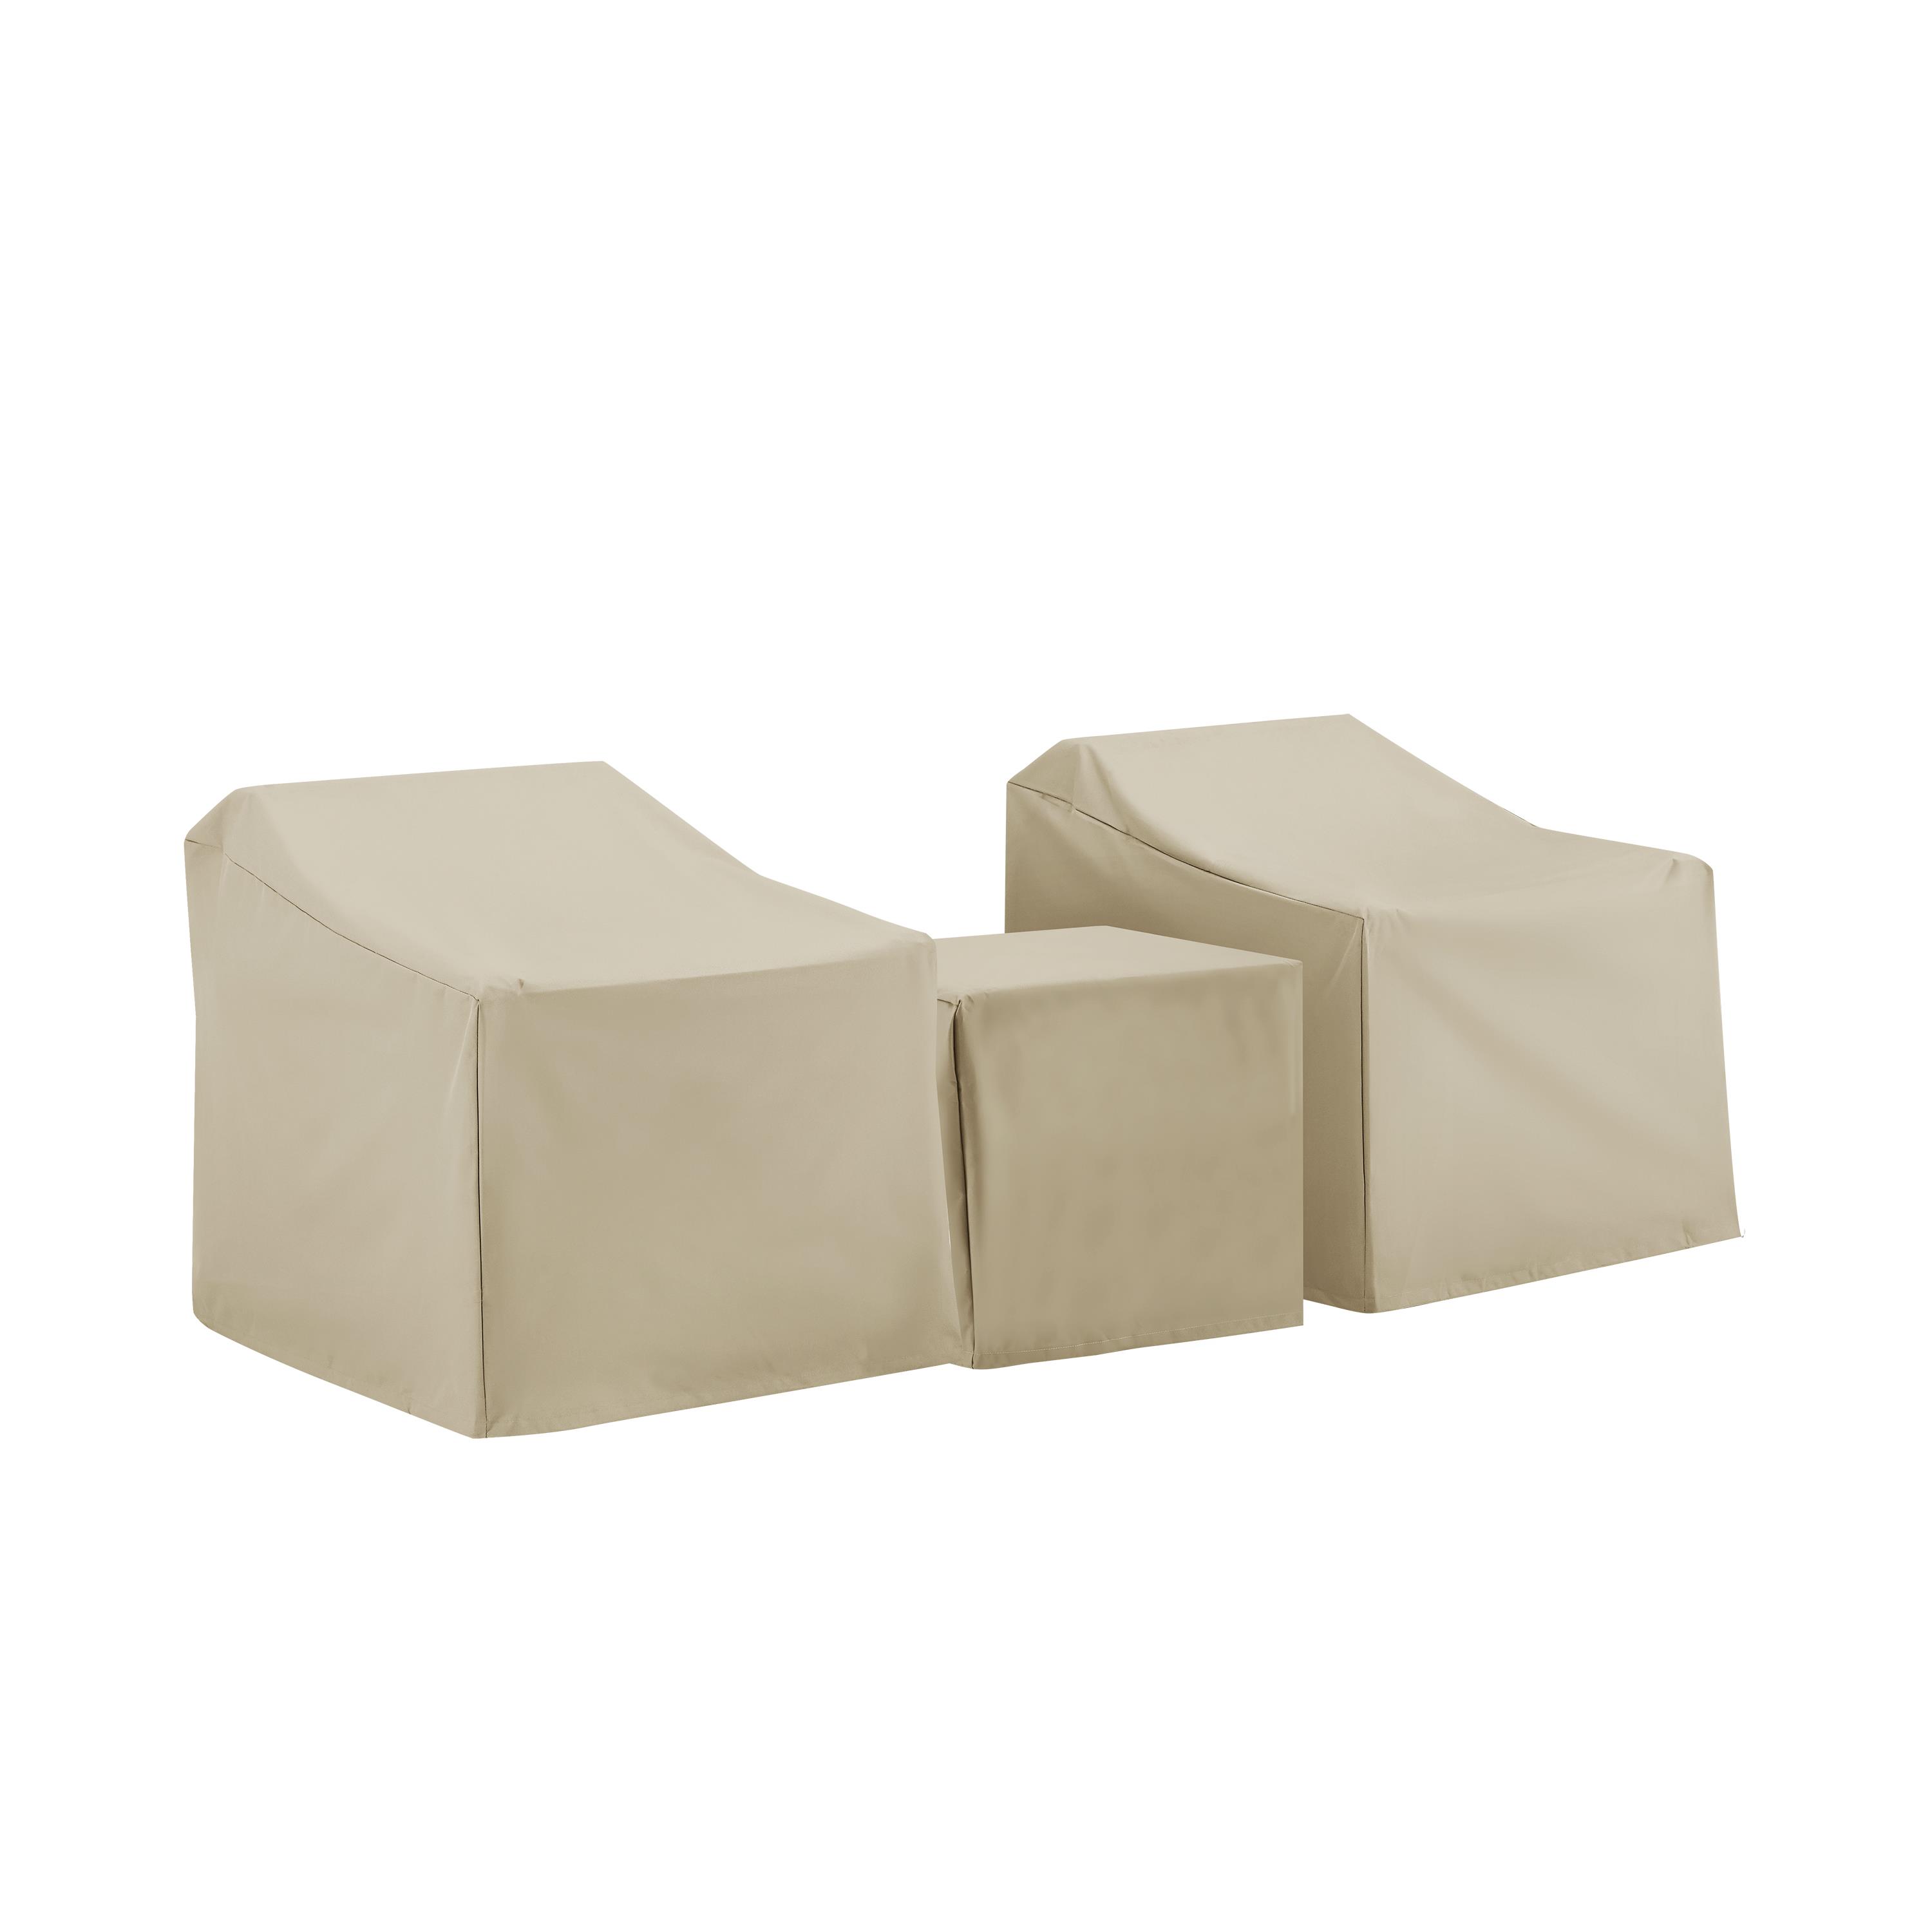 3Pc Furniture Cover Set - image 3 of 7